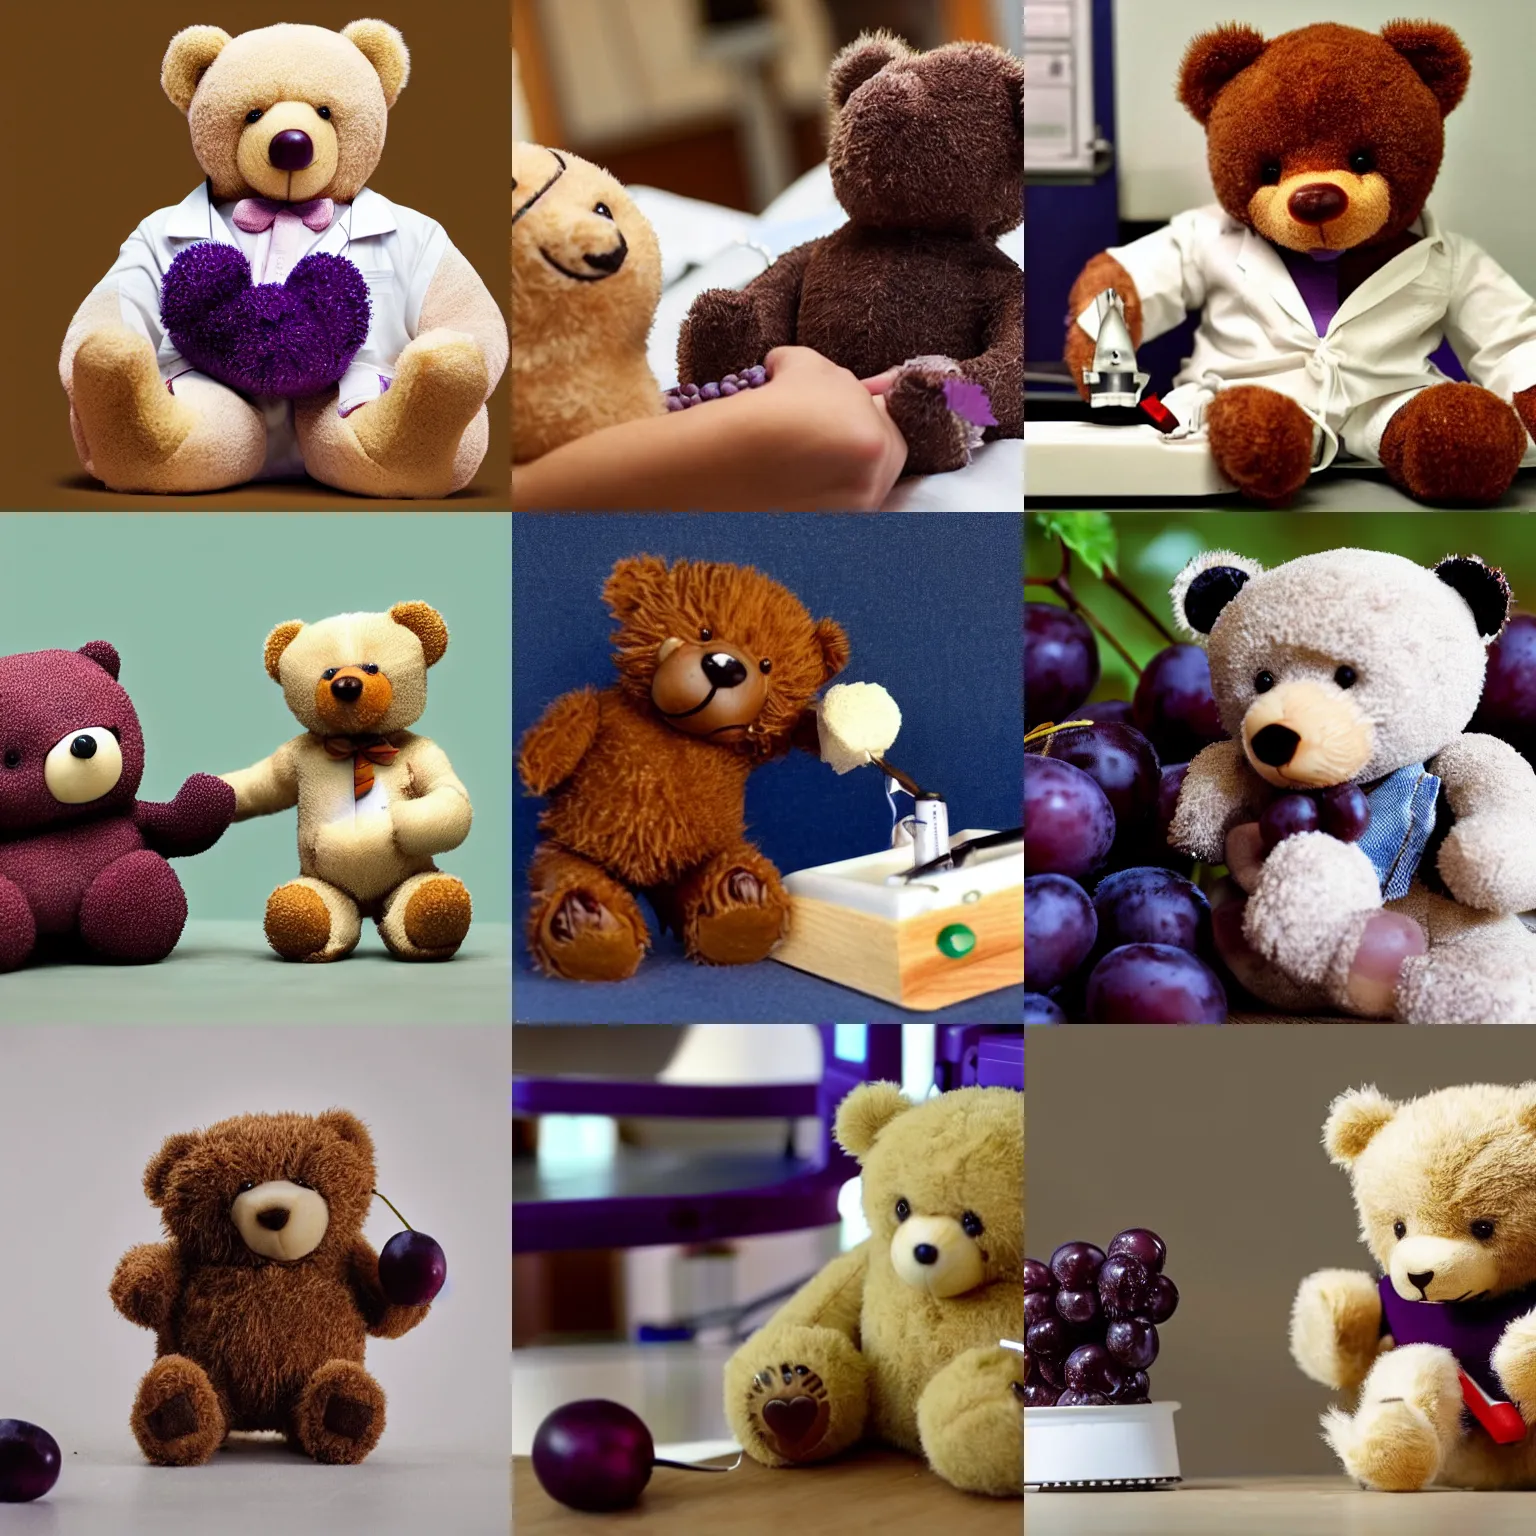 Prompt: a cute teddy bear who is a doctor doing surgery on a grape